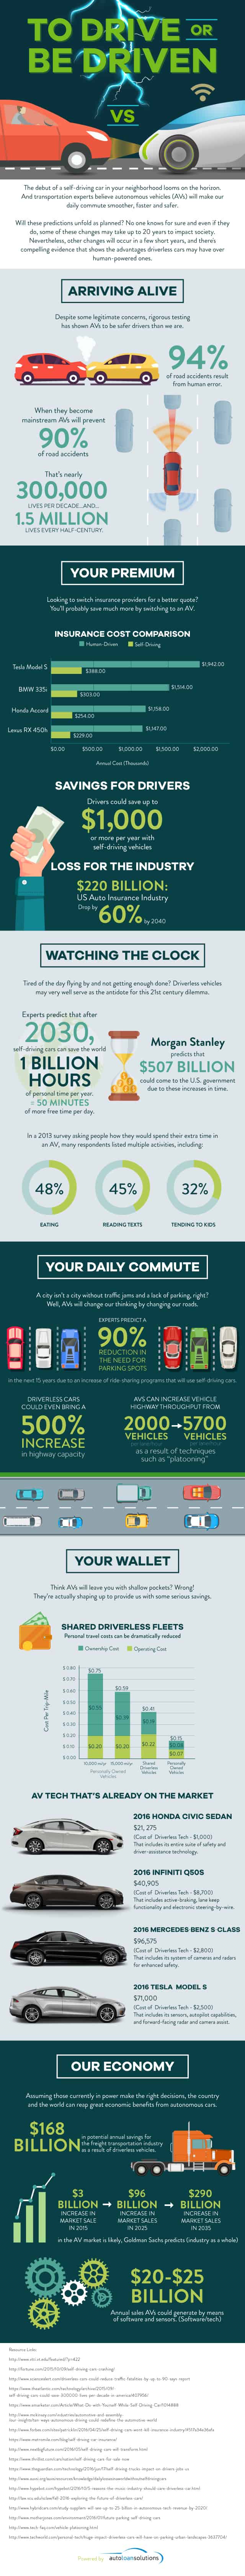 impact on autonomous vehicles on safety, commute, insurance, travel costs